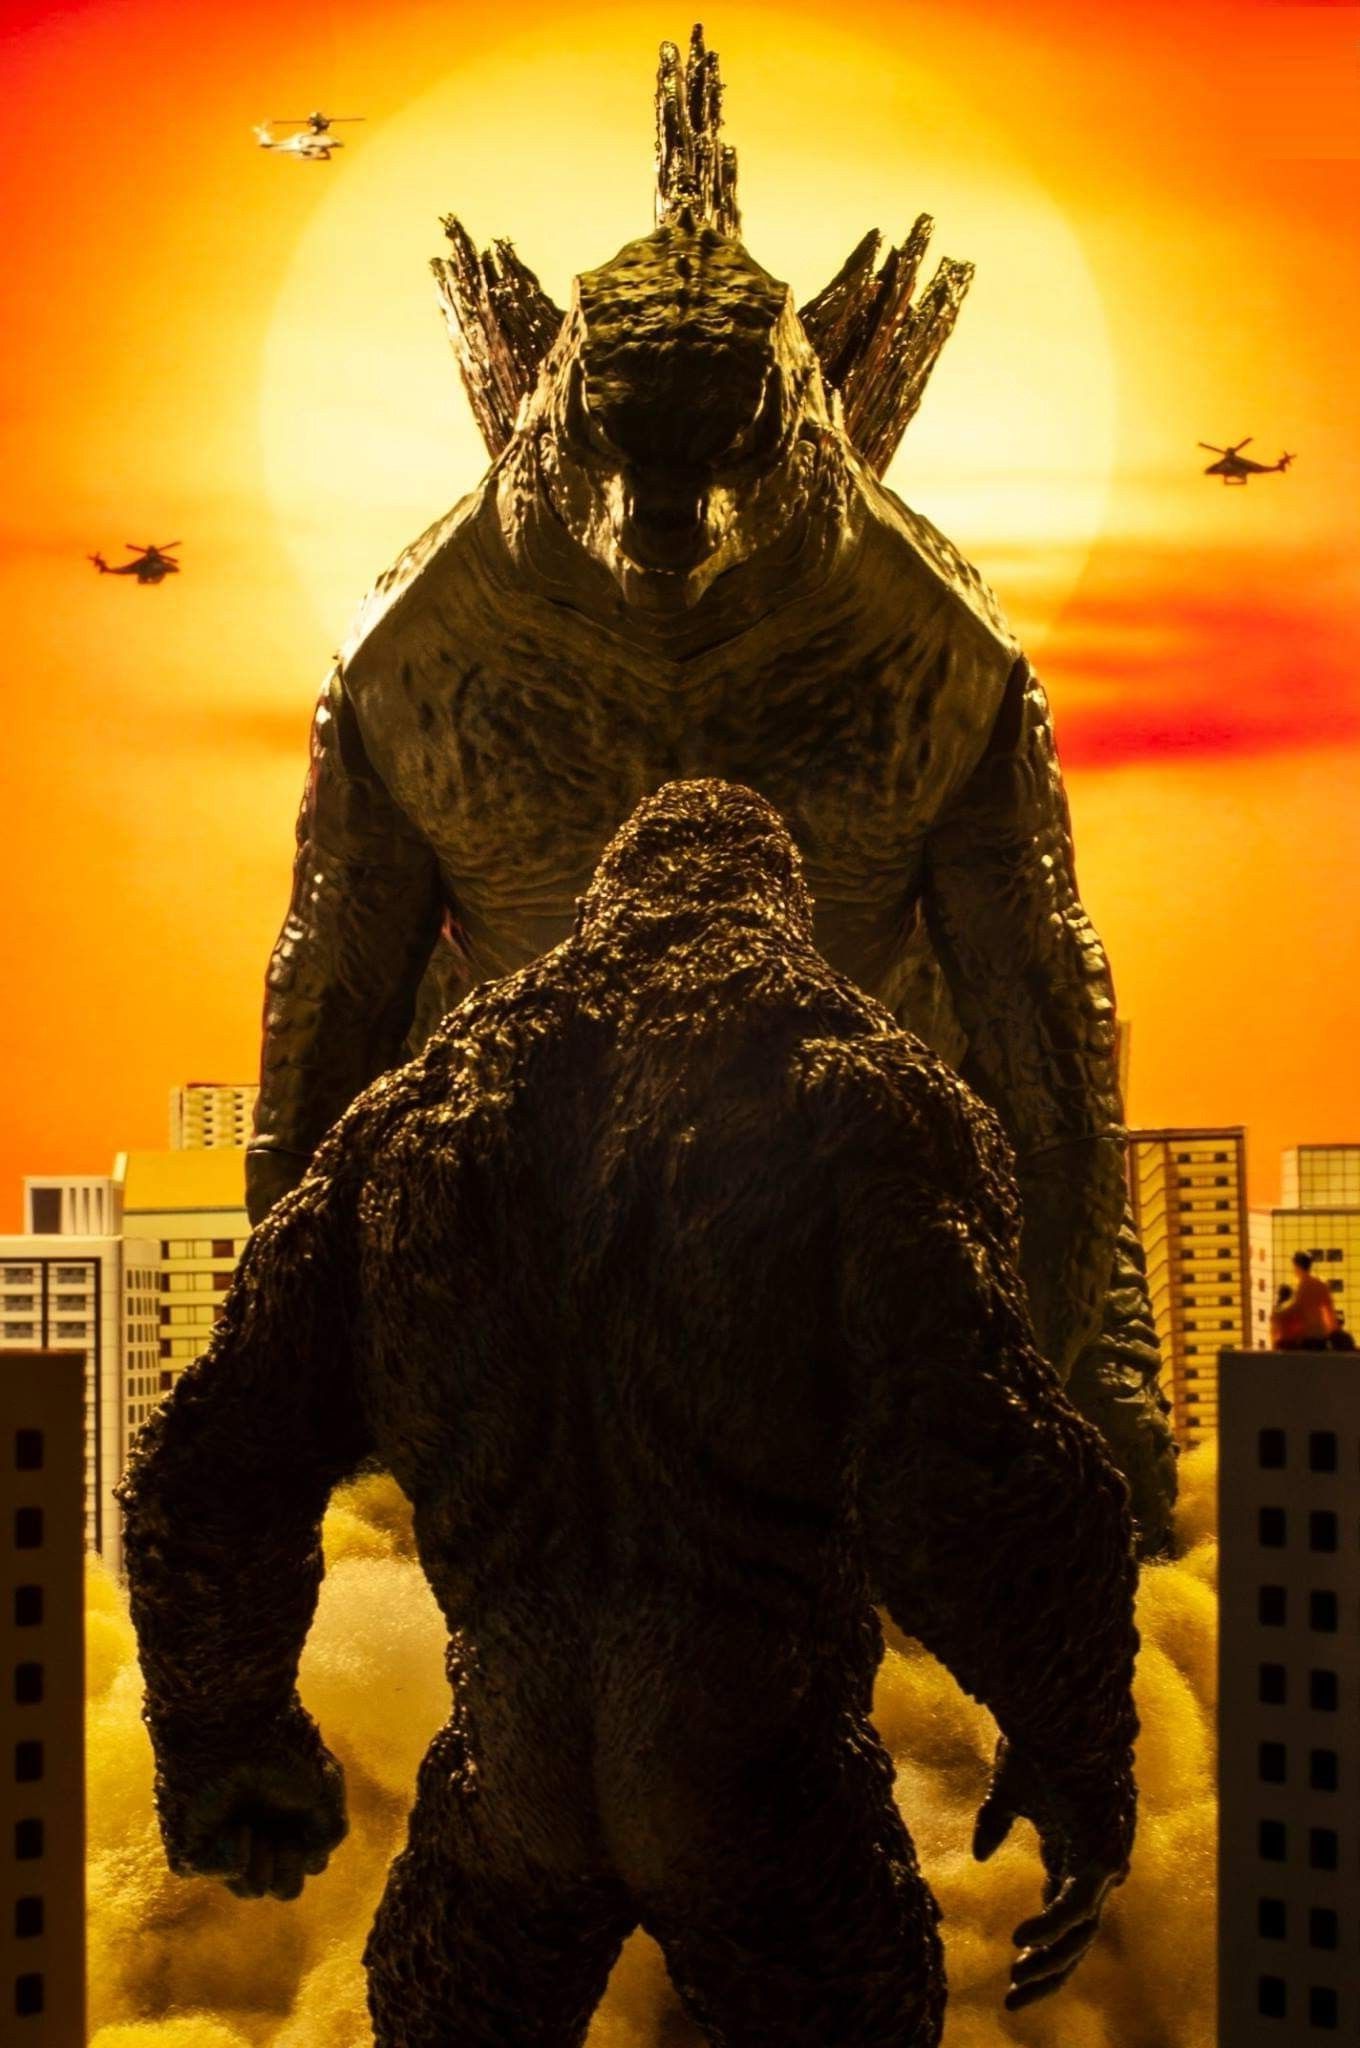 Godzilla vs Kong Wallpaper for mobile phone, tablet, desktop computer and other devices HD and 4K wallpape. King kong vs godzilla, Godzilla vs, Godzilla wallpaper